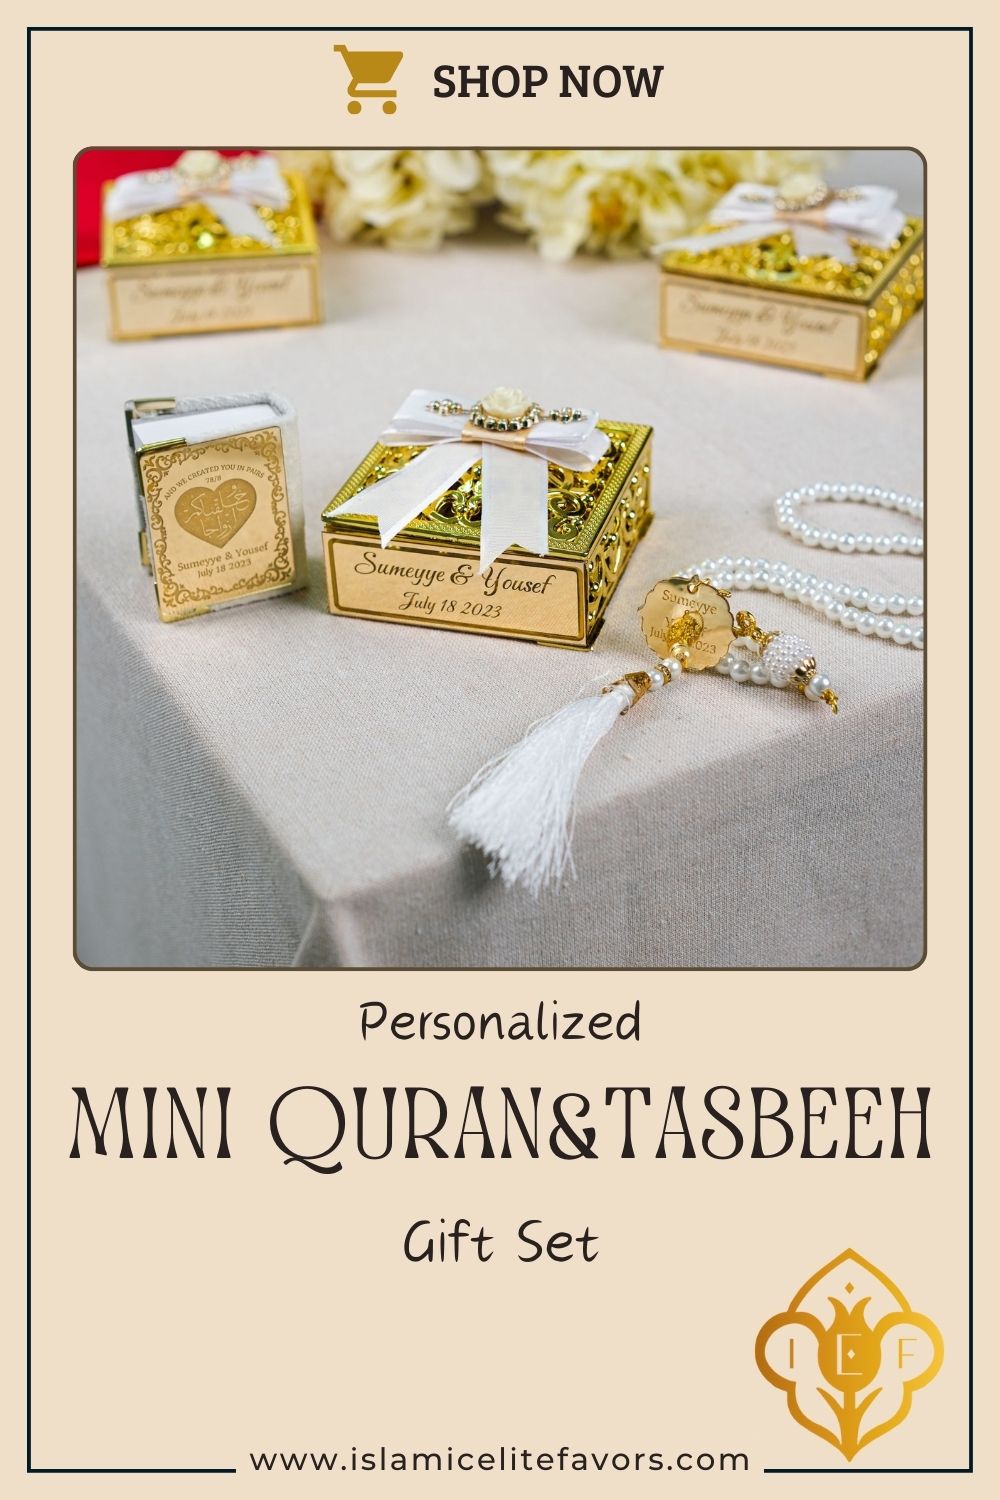 Personalized Velvet Mini Quran Pearl Tasbeeh Islam Muslim Gift Set - Islamic Elite Favors is a handmade gift shop offering a wide variety of unique and personalized gifts for all occasions. Whether you're looking for the perfect Ramadan, Eid, Hajj, wedding gift or something special for a birthday, baby shower or anniversary, we have something for everyone. High quality, made with love.